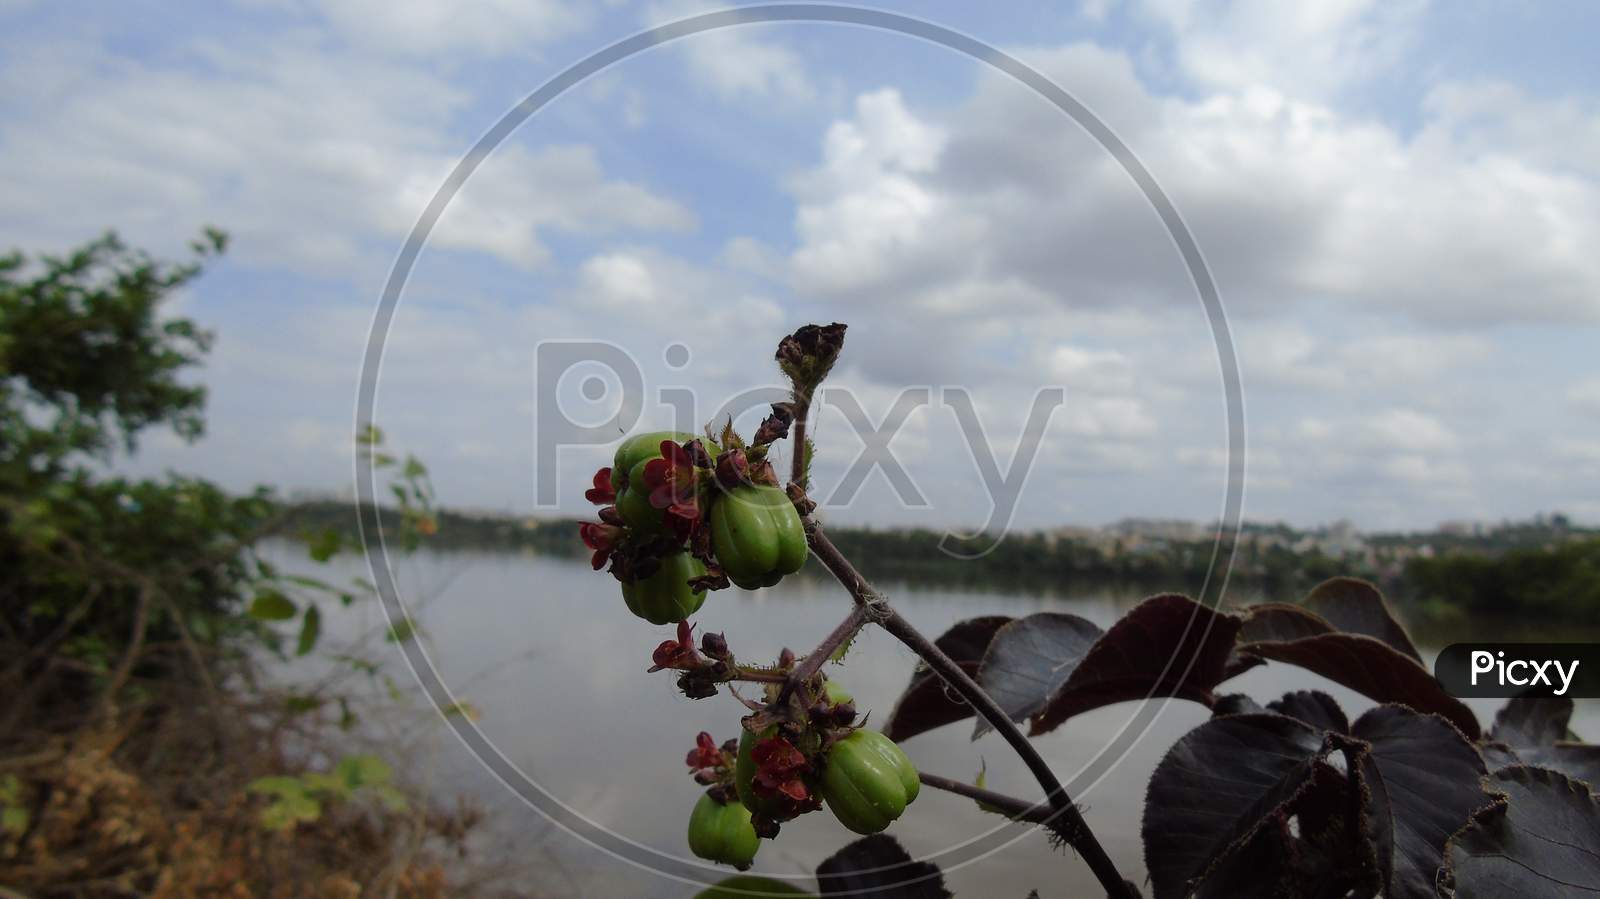 flowering plant in water background